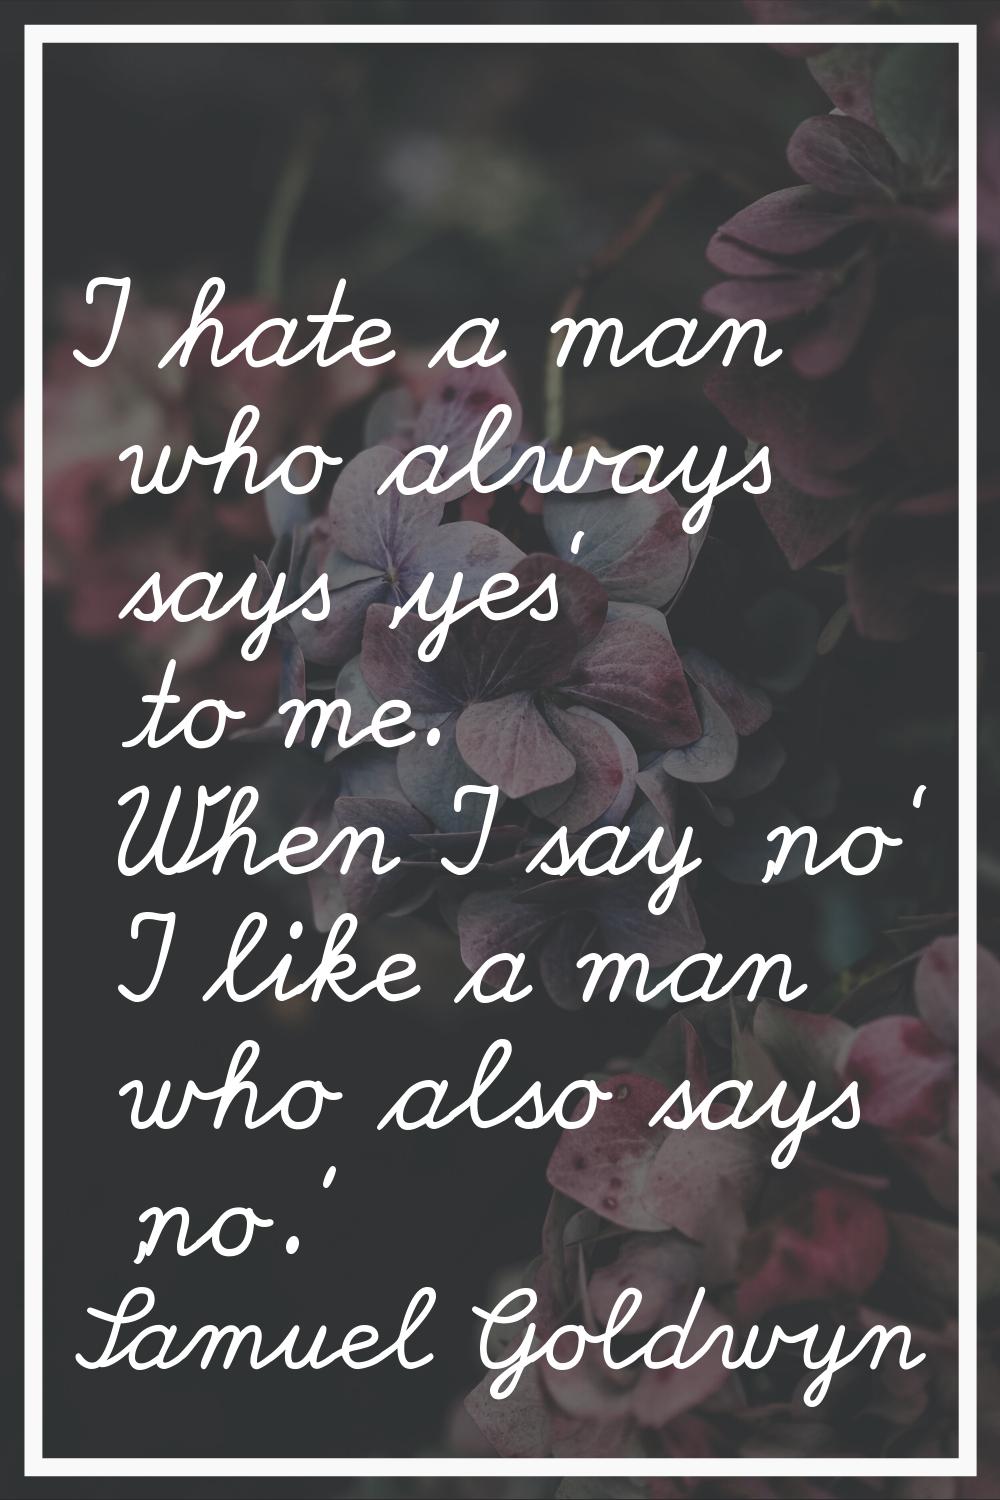 I hate a man who always says 'yes' to me. When I say 'no' I like a man who also says 'no.'